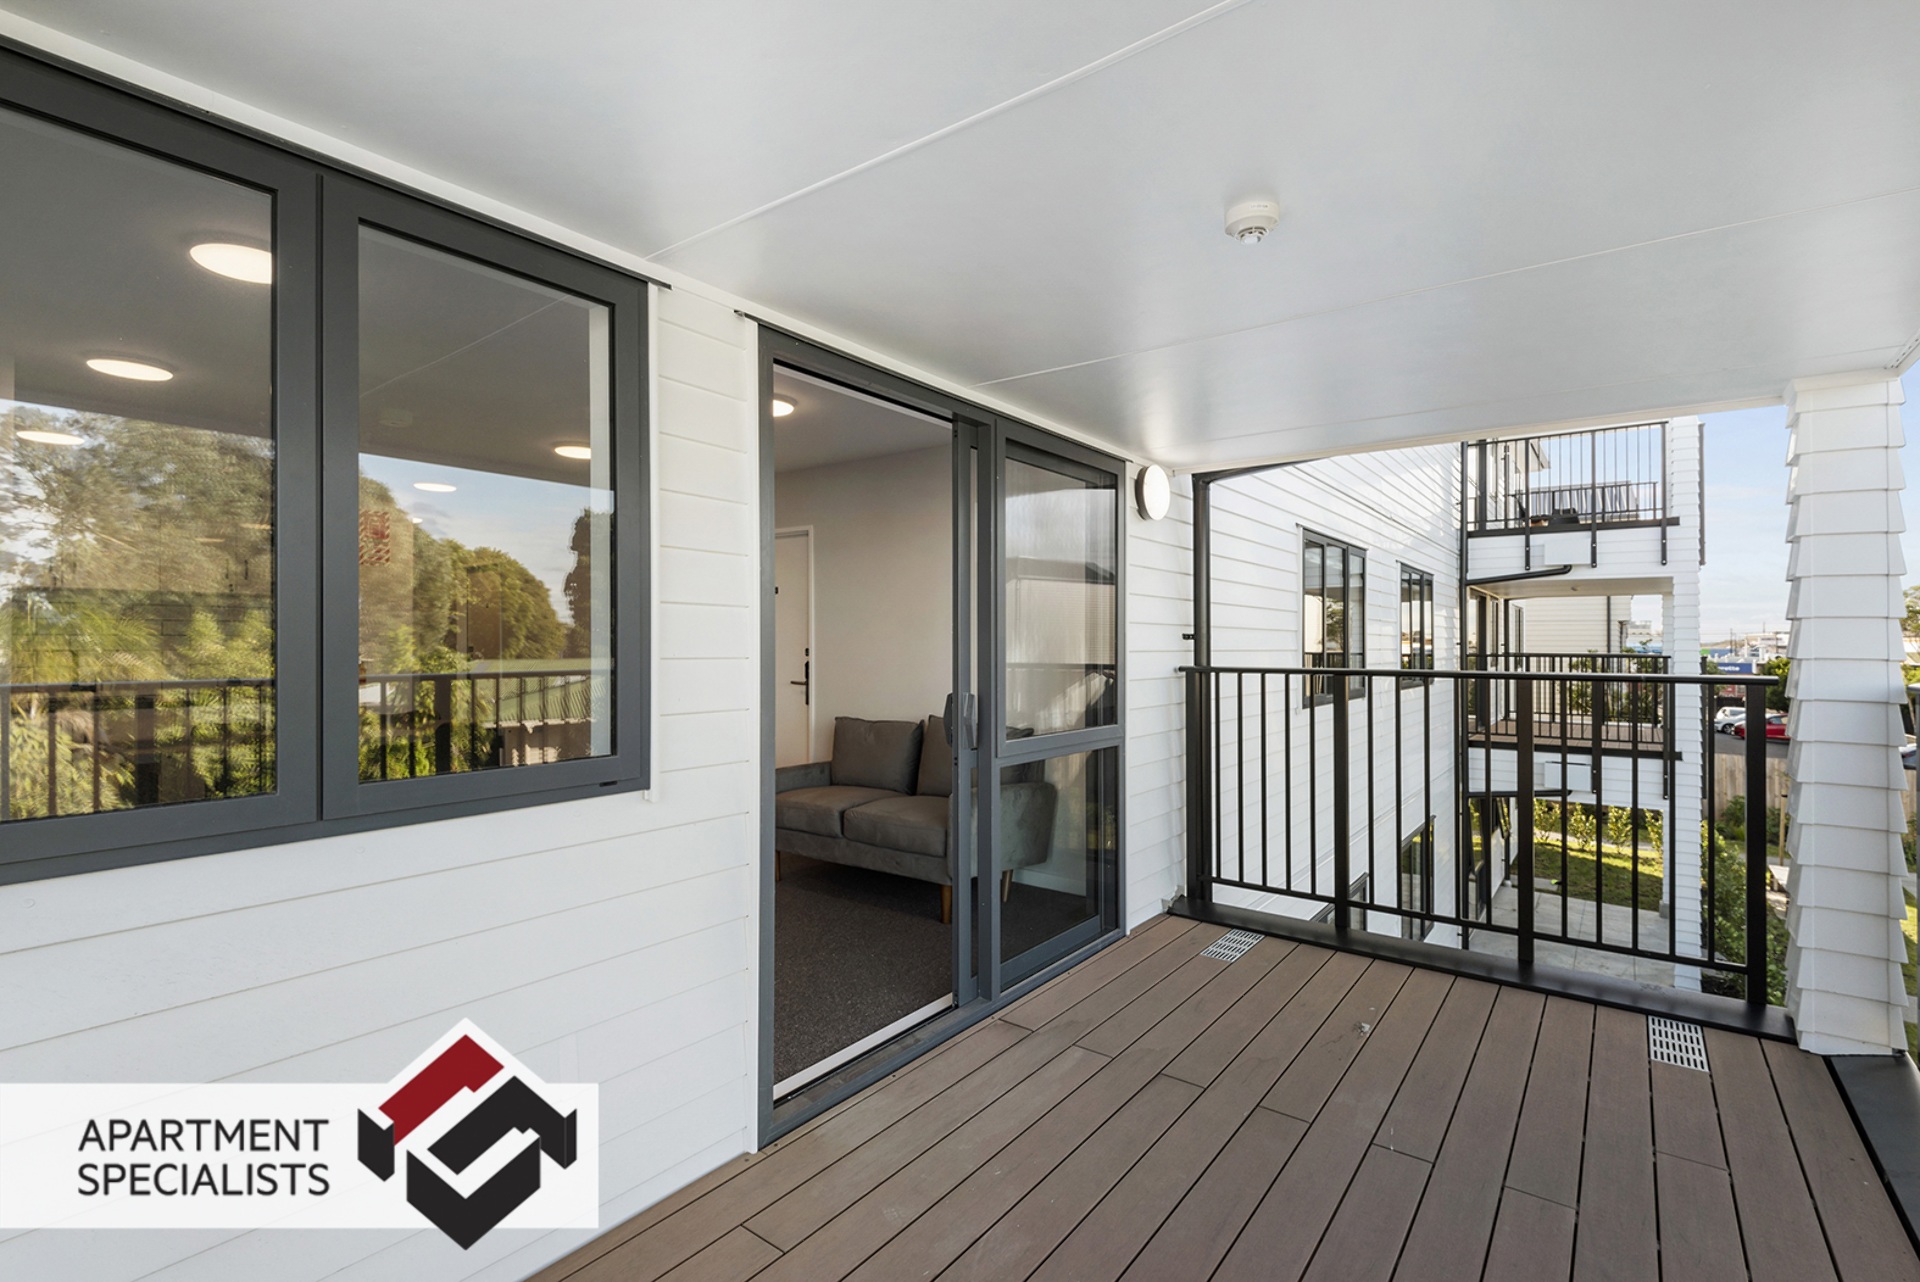 9 | 57 Henderson Valley Road, Henderson Valley | Apartment Specialists